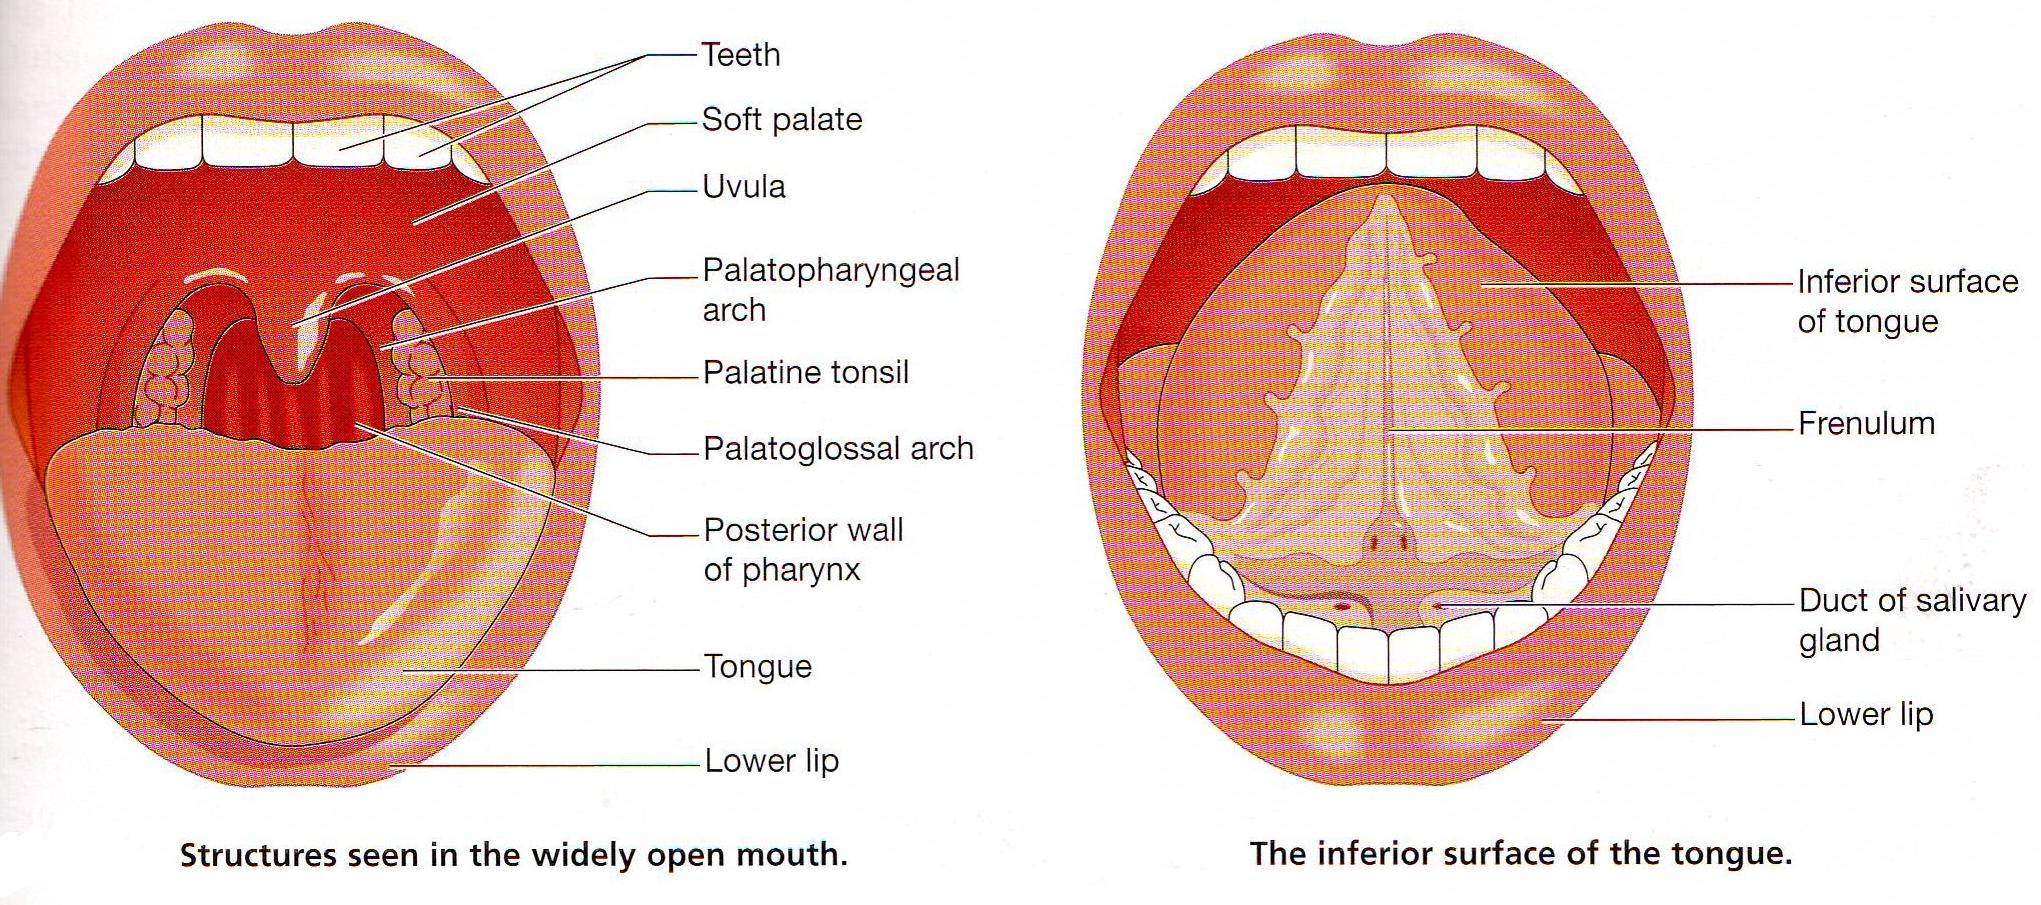 The Tongue and mouth